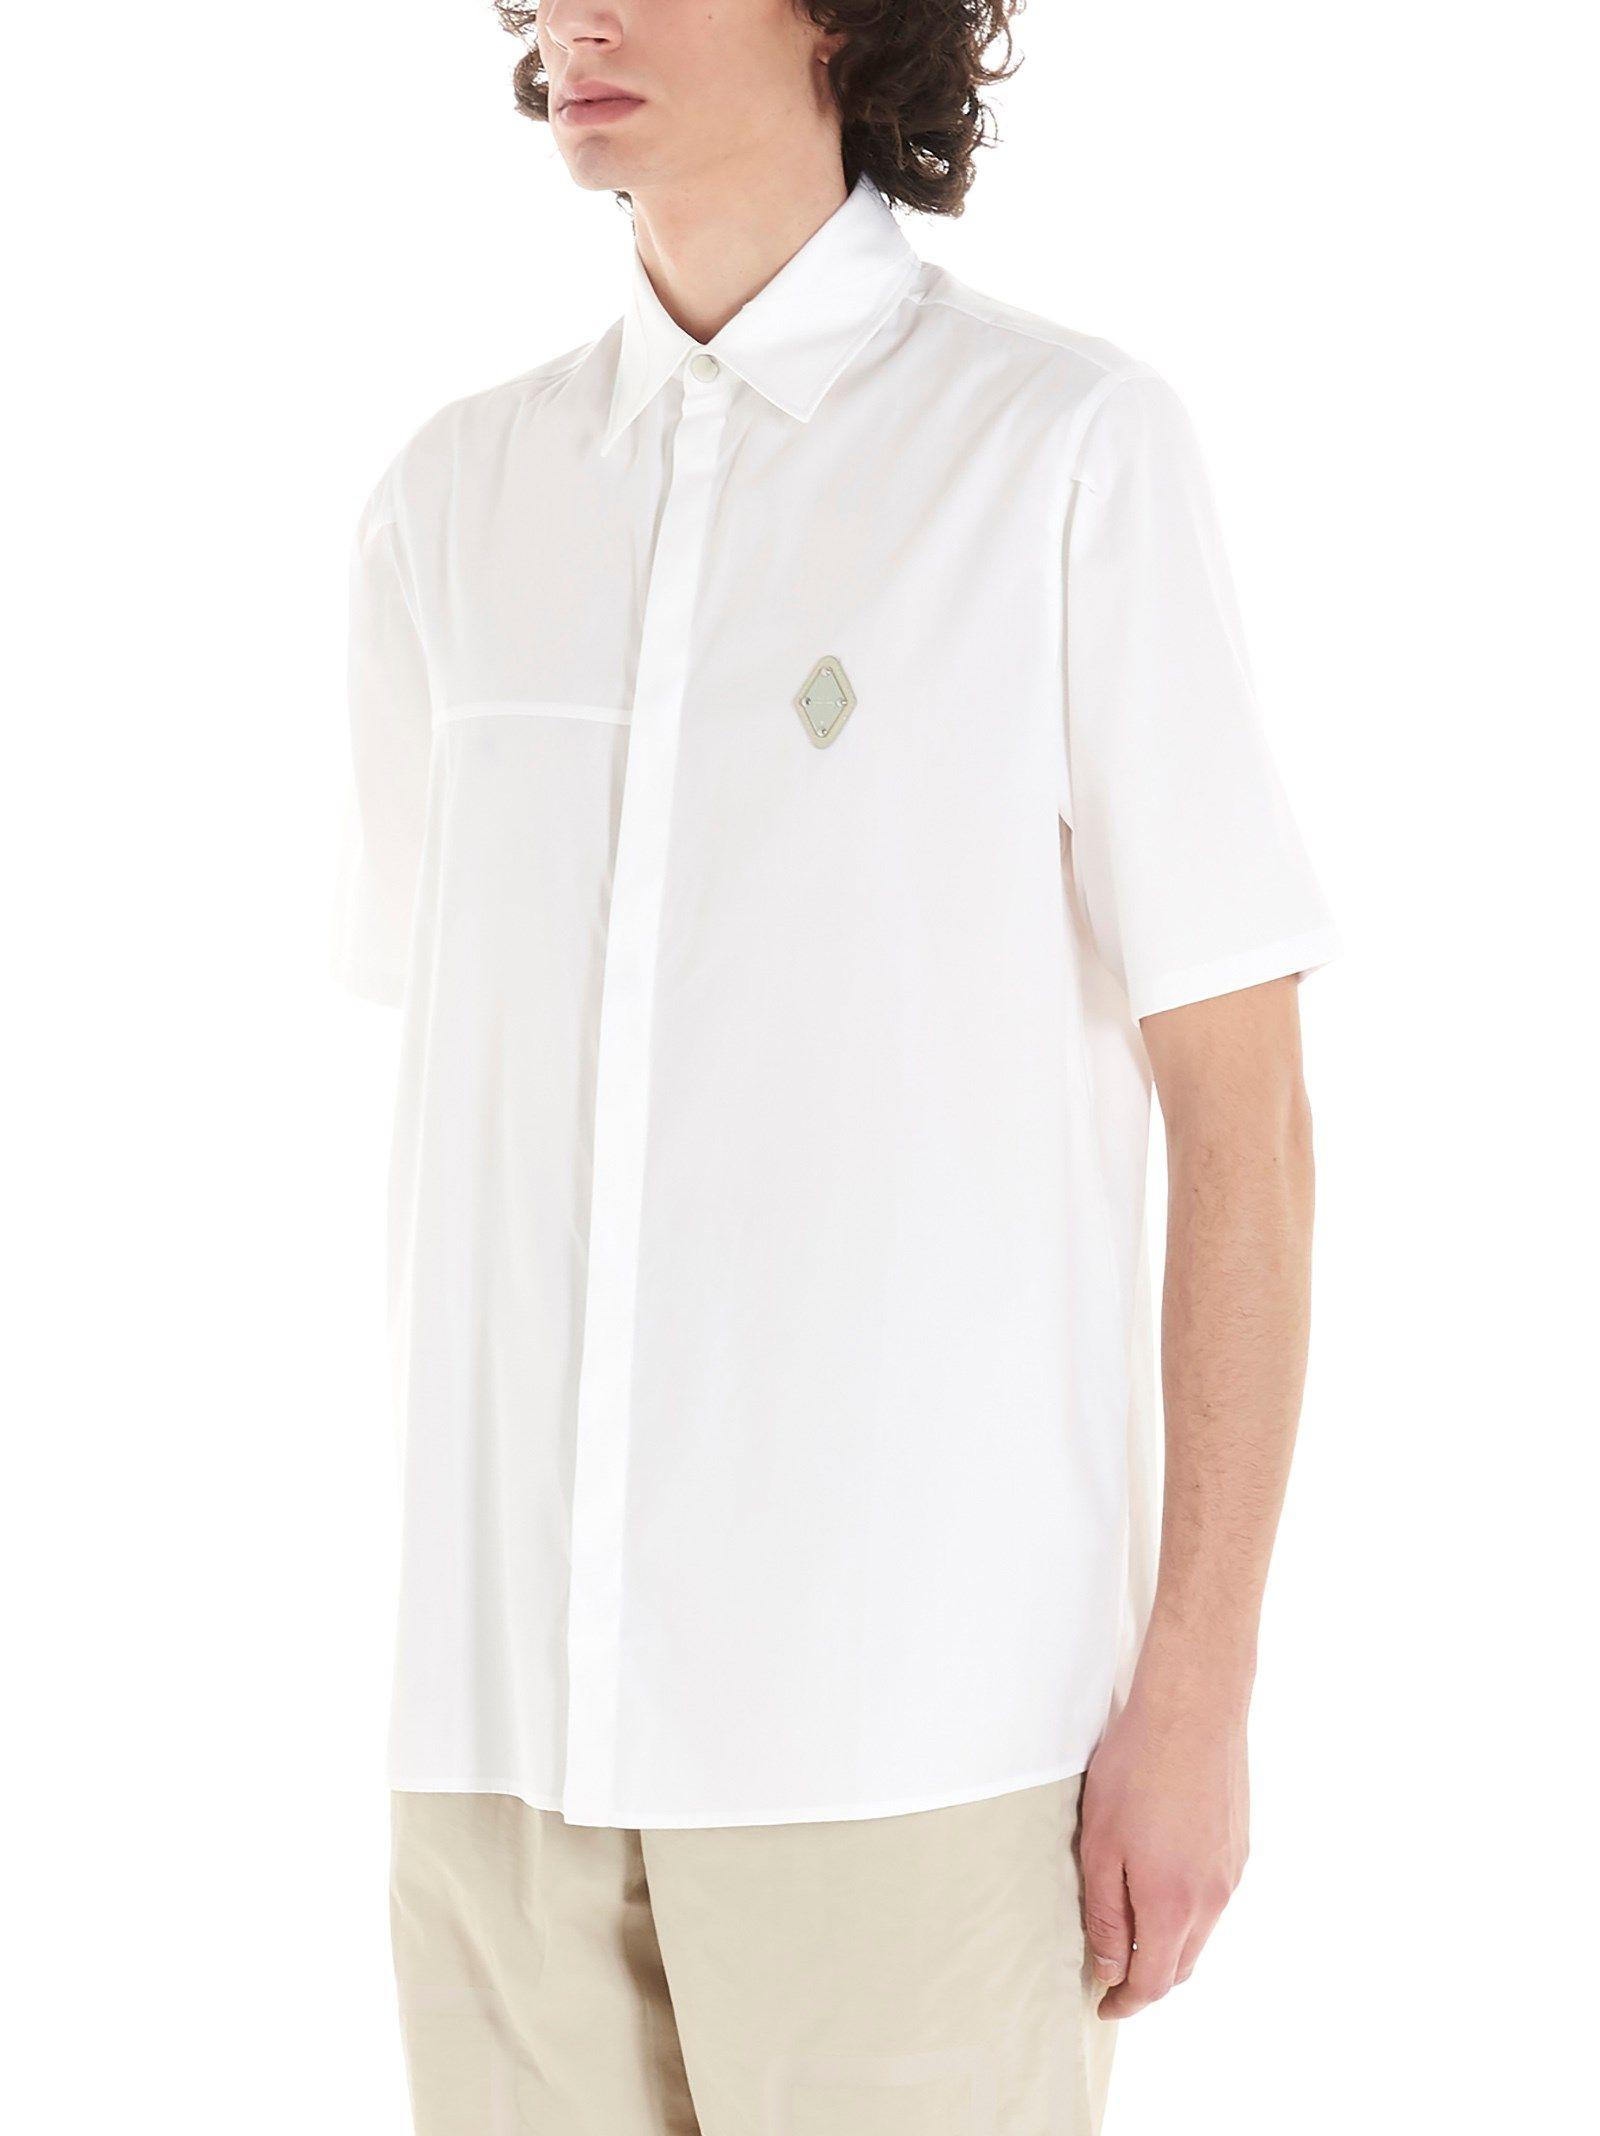 A_COLD_WALL* Polyamide Shirt in White for Men - Lyst